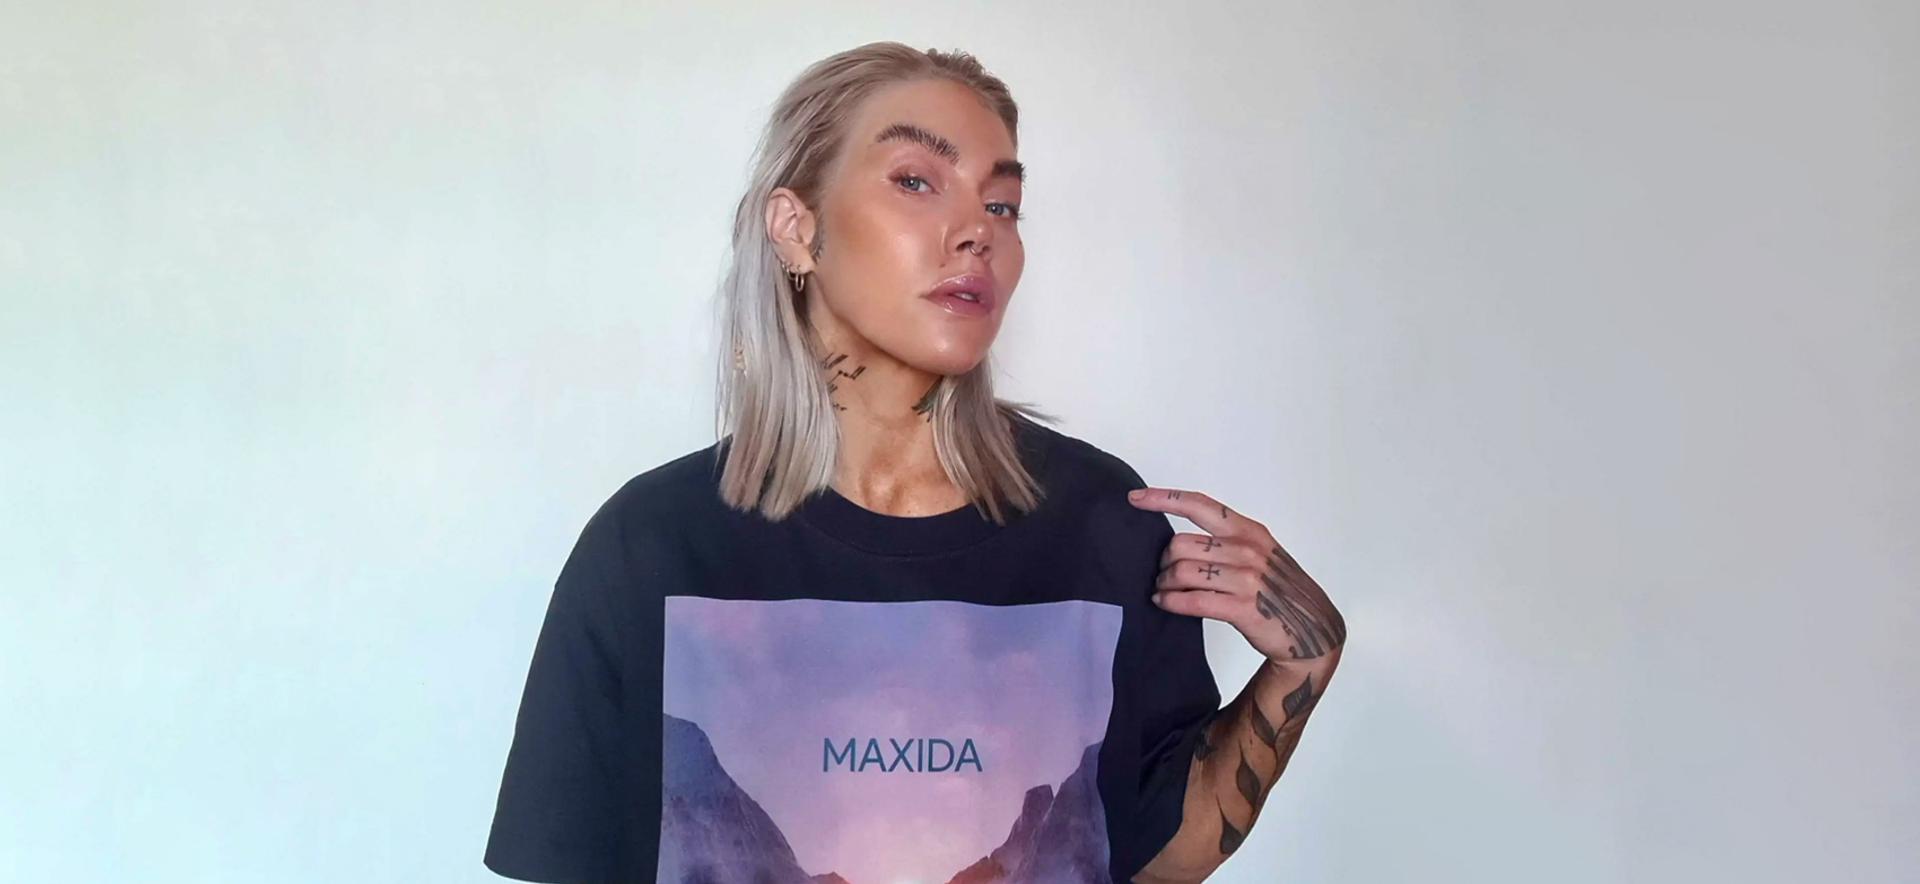 Maxida Märak stands proud in her own merch. A strong, powerful, charismatic performer and activist, she champions the rights of the Sámi people.